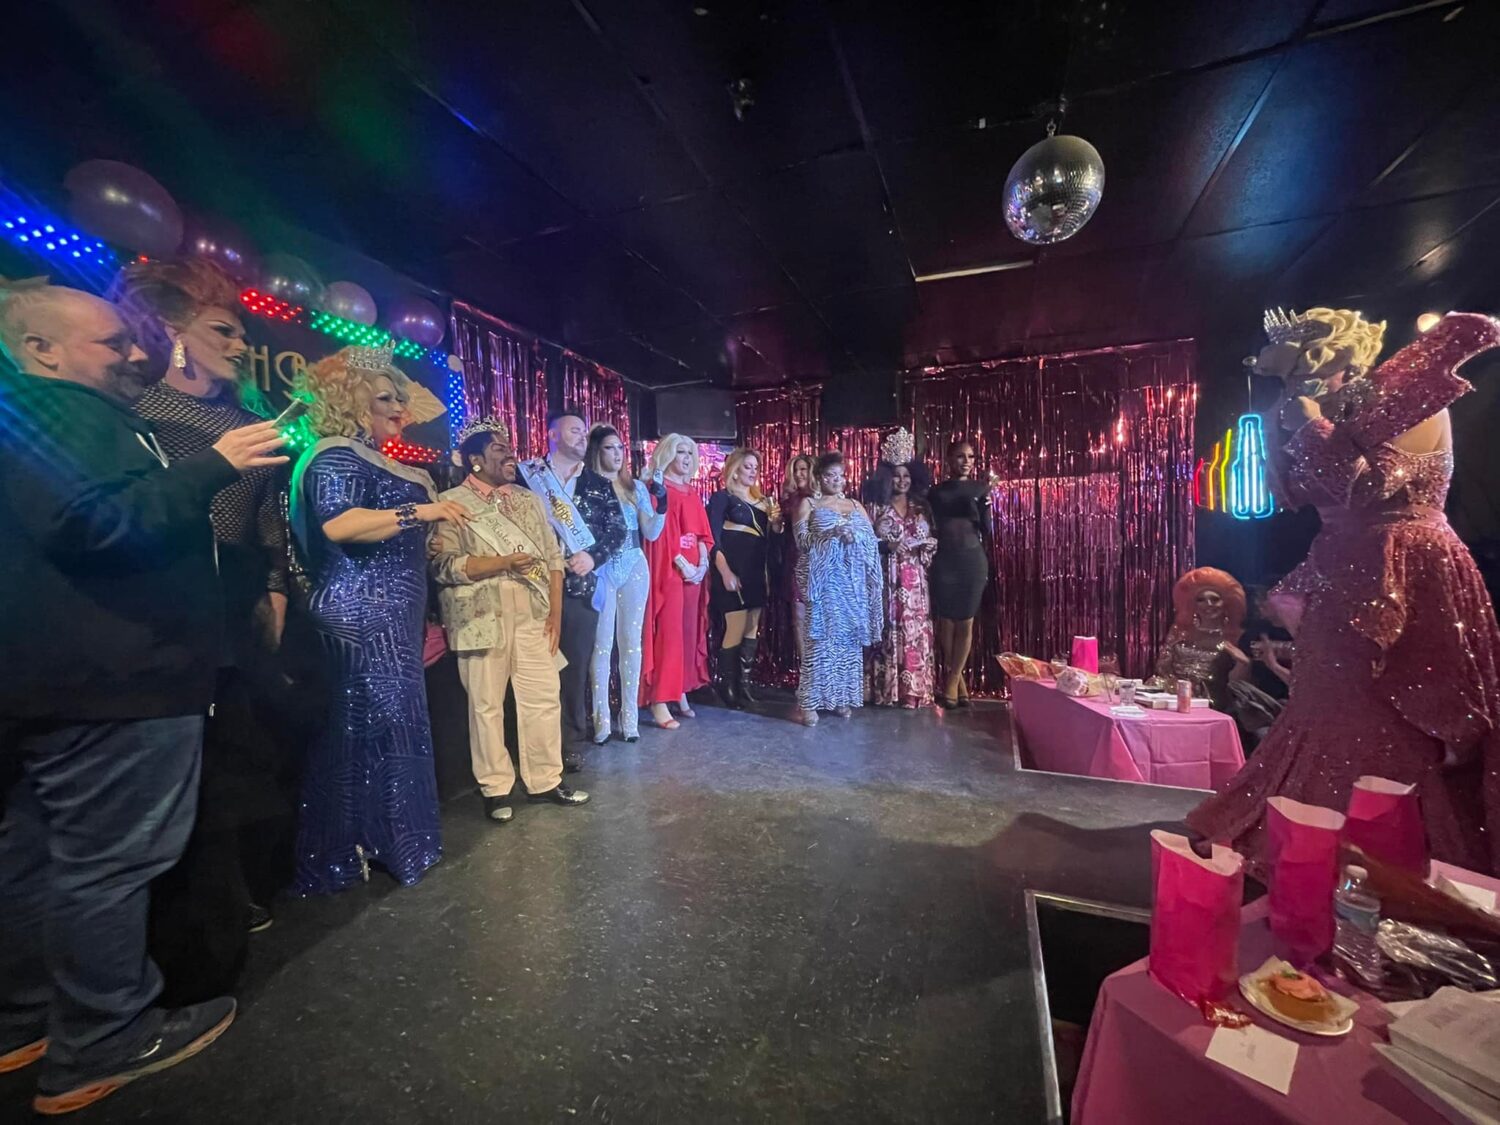 Ava Aurora Foxx in her final number as Miss Southbend |  Miss Southbend Pageant | Southbend Tavern (Columbus, Ohio) | 1/30/2022 [Photo by Vintage Blue]